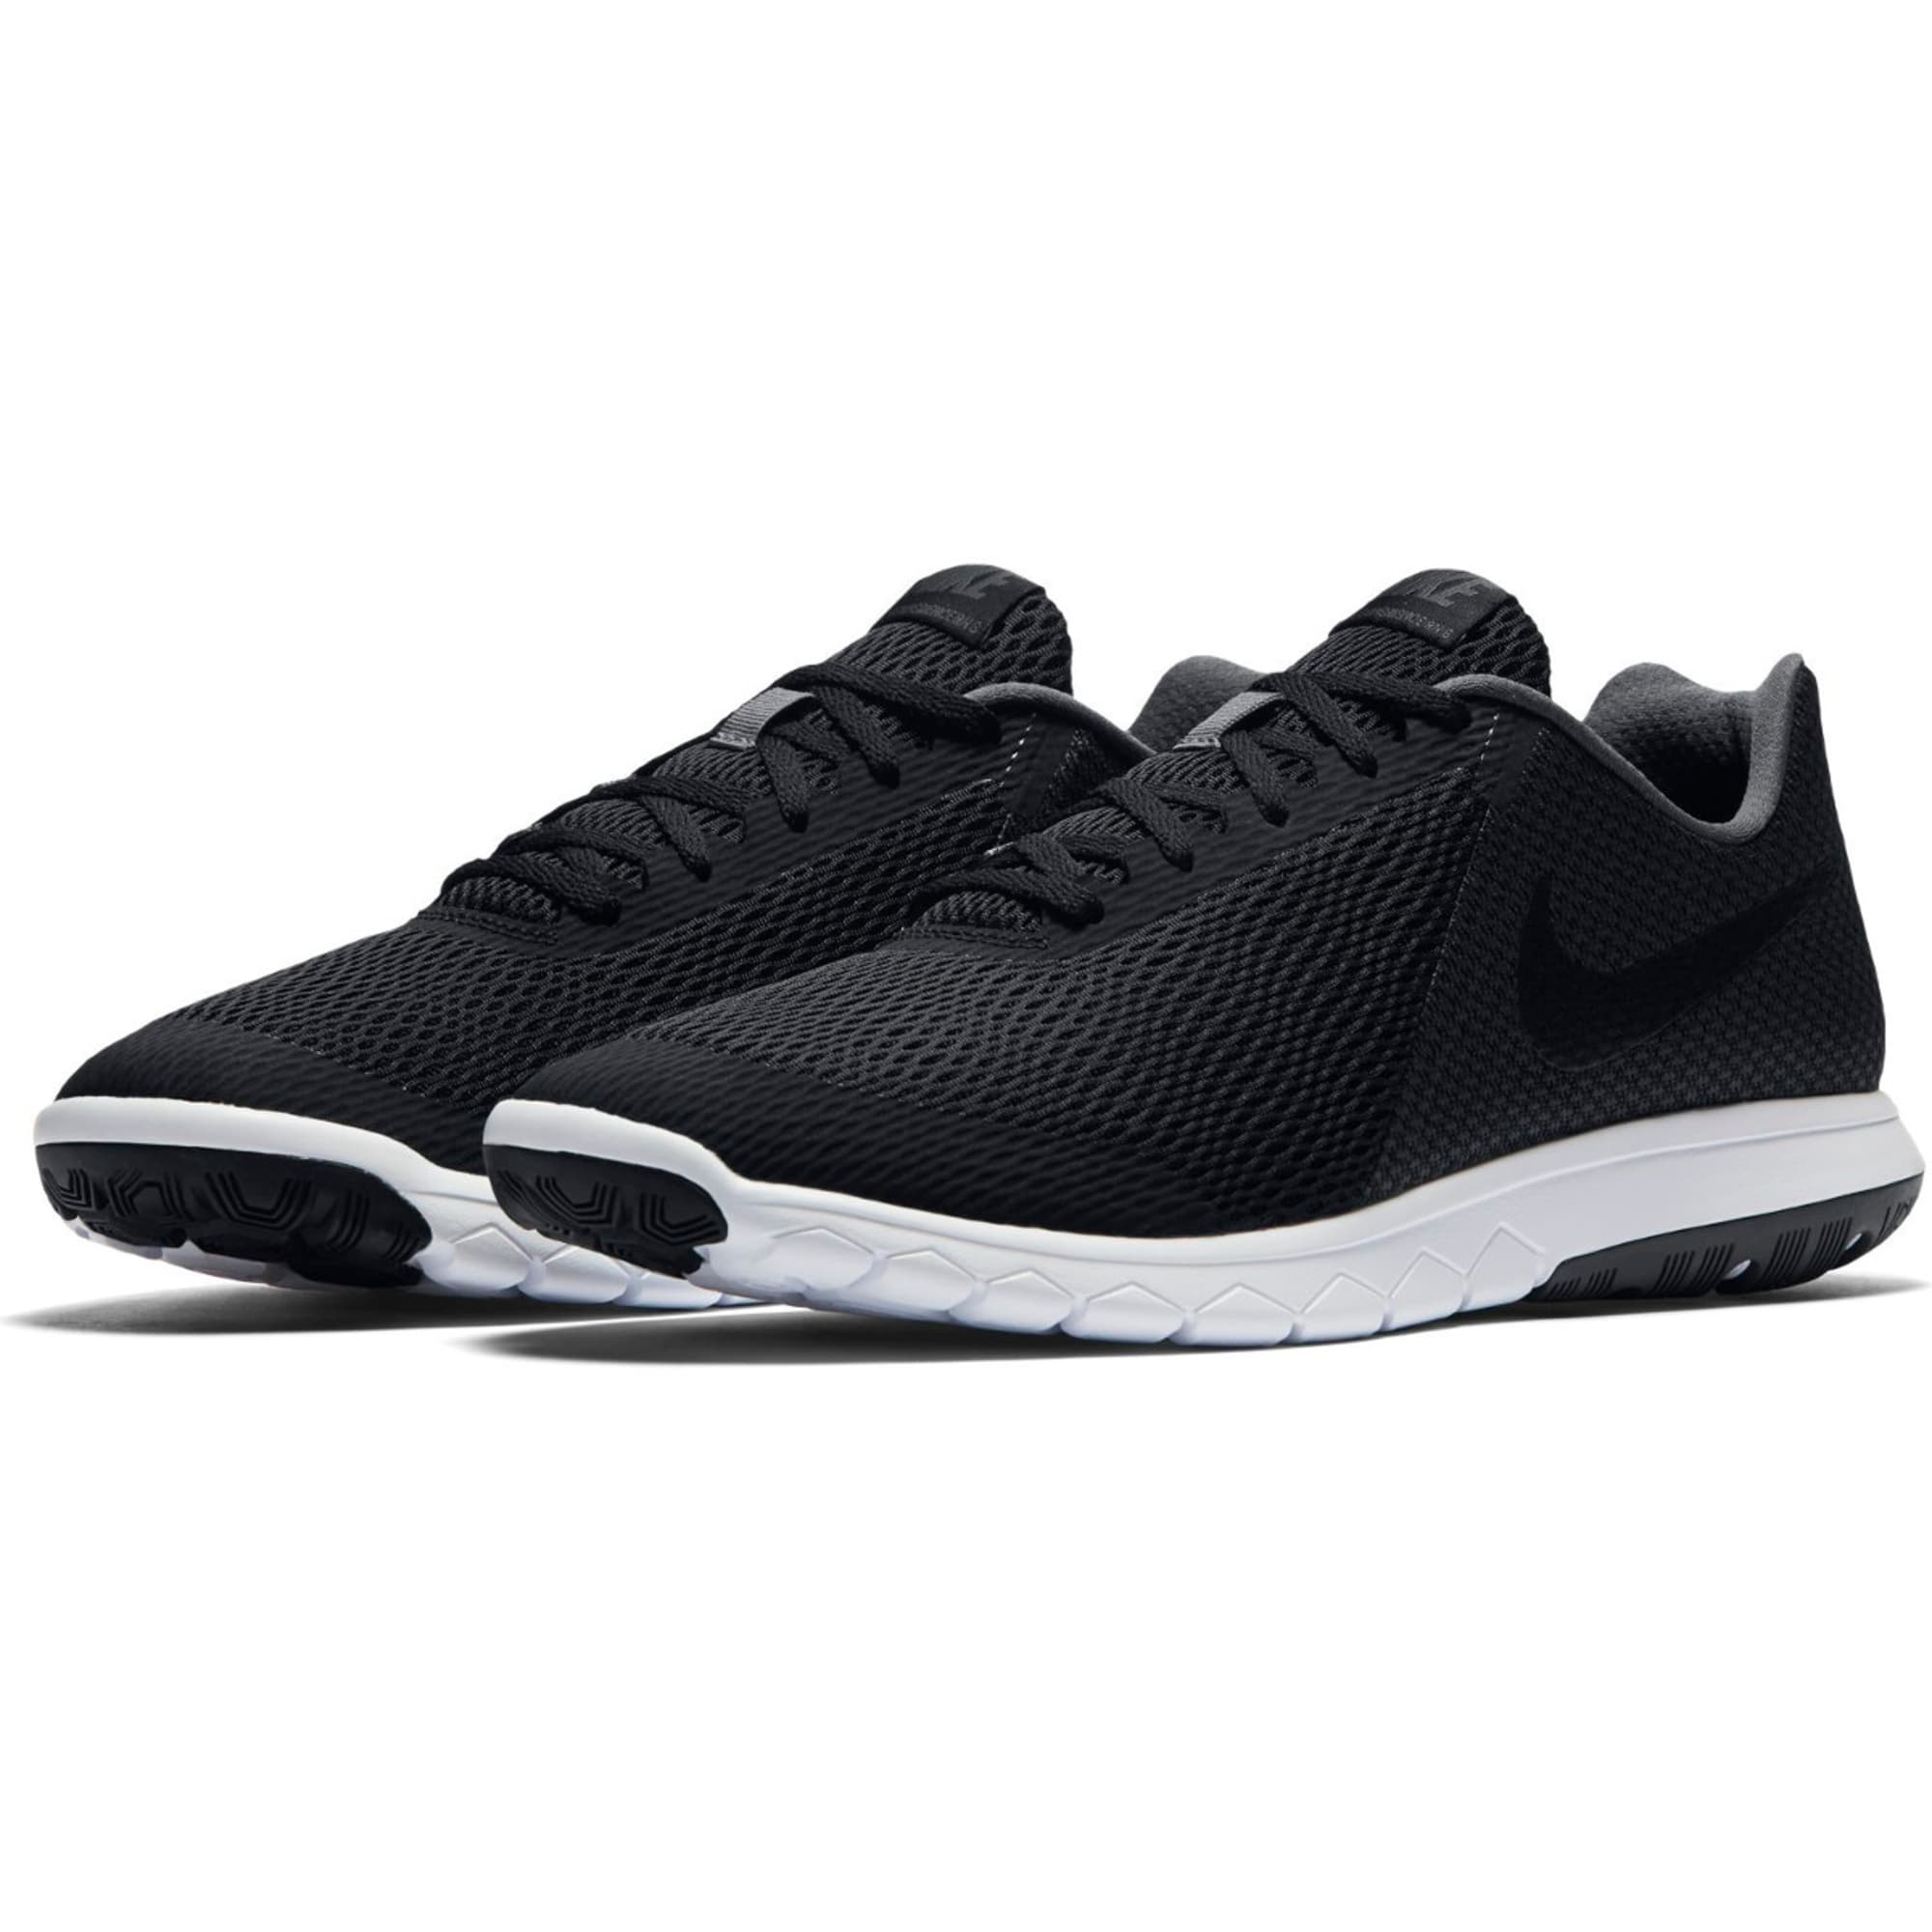 NIKE Men's Flex Experience 6 Running Shoes - Bob's Stores